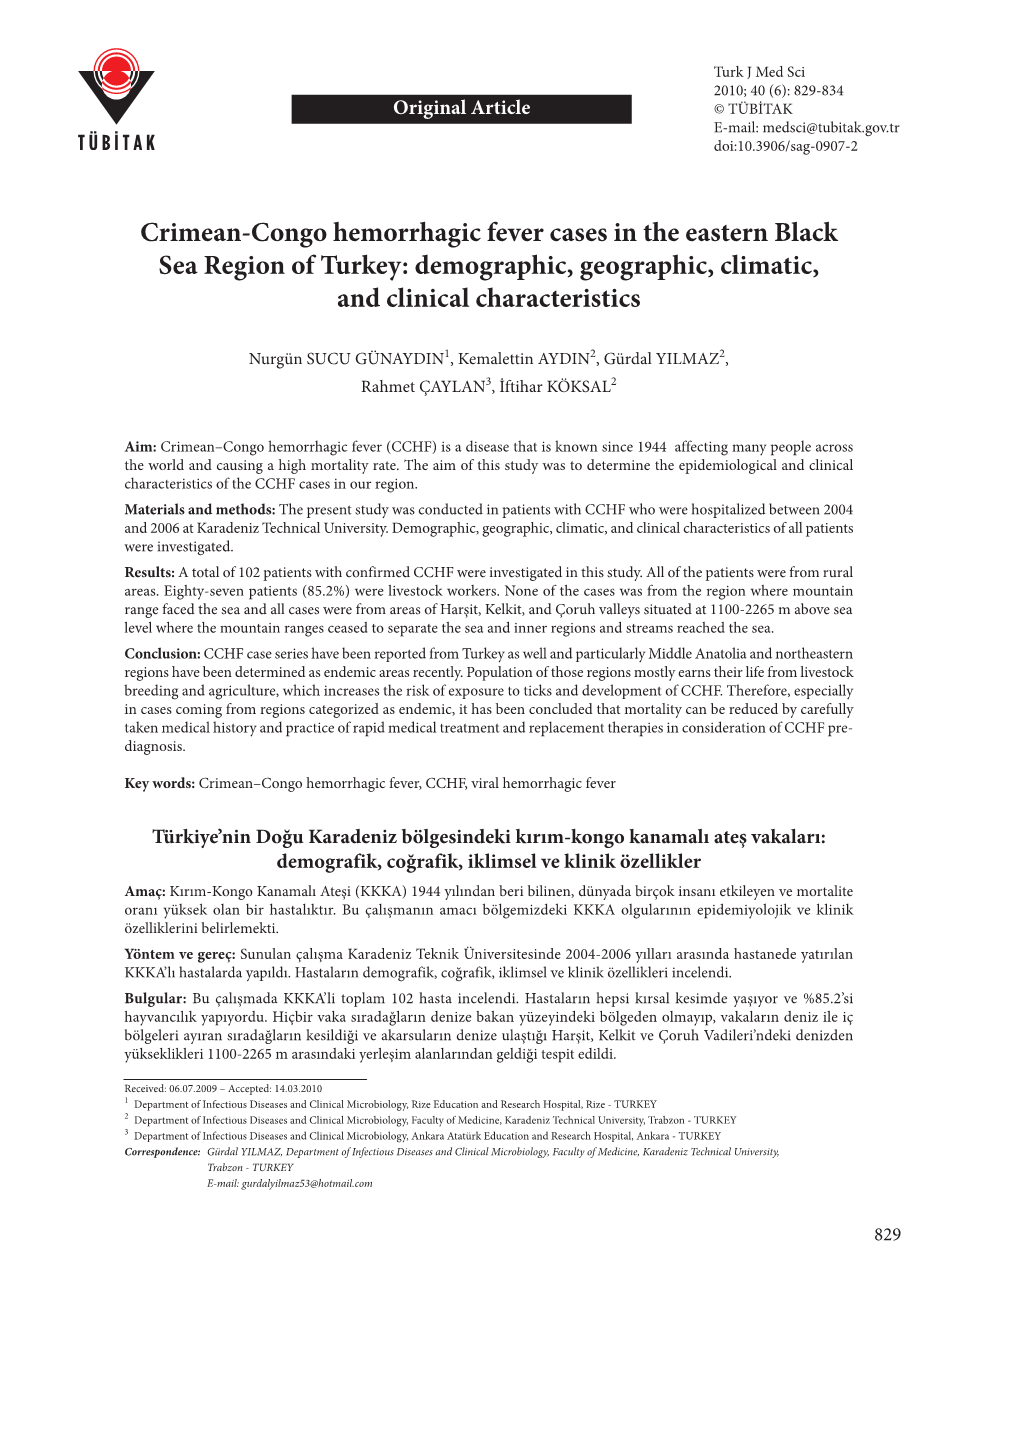 Crimean-Congo Hemorrhagic Fever Cases in the Eastern Black Sea Region of Turkey: Demographic, Geographic, Climatic, and Clinical Characteristics